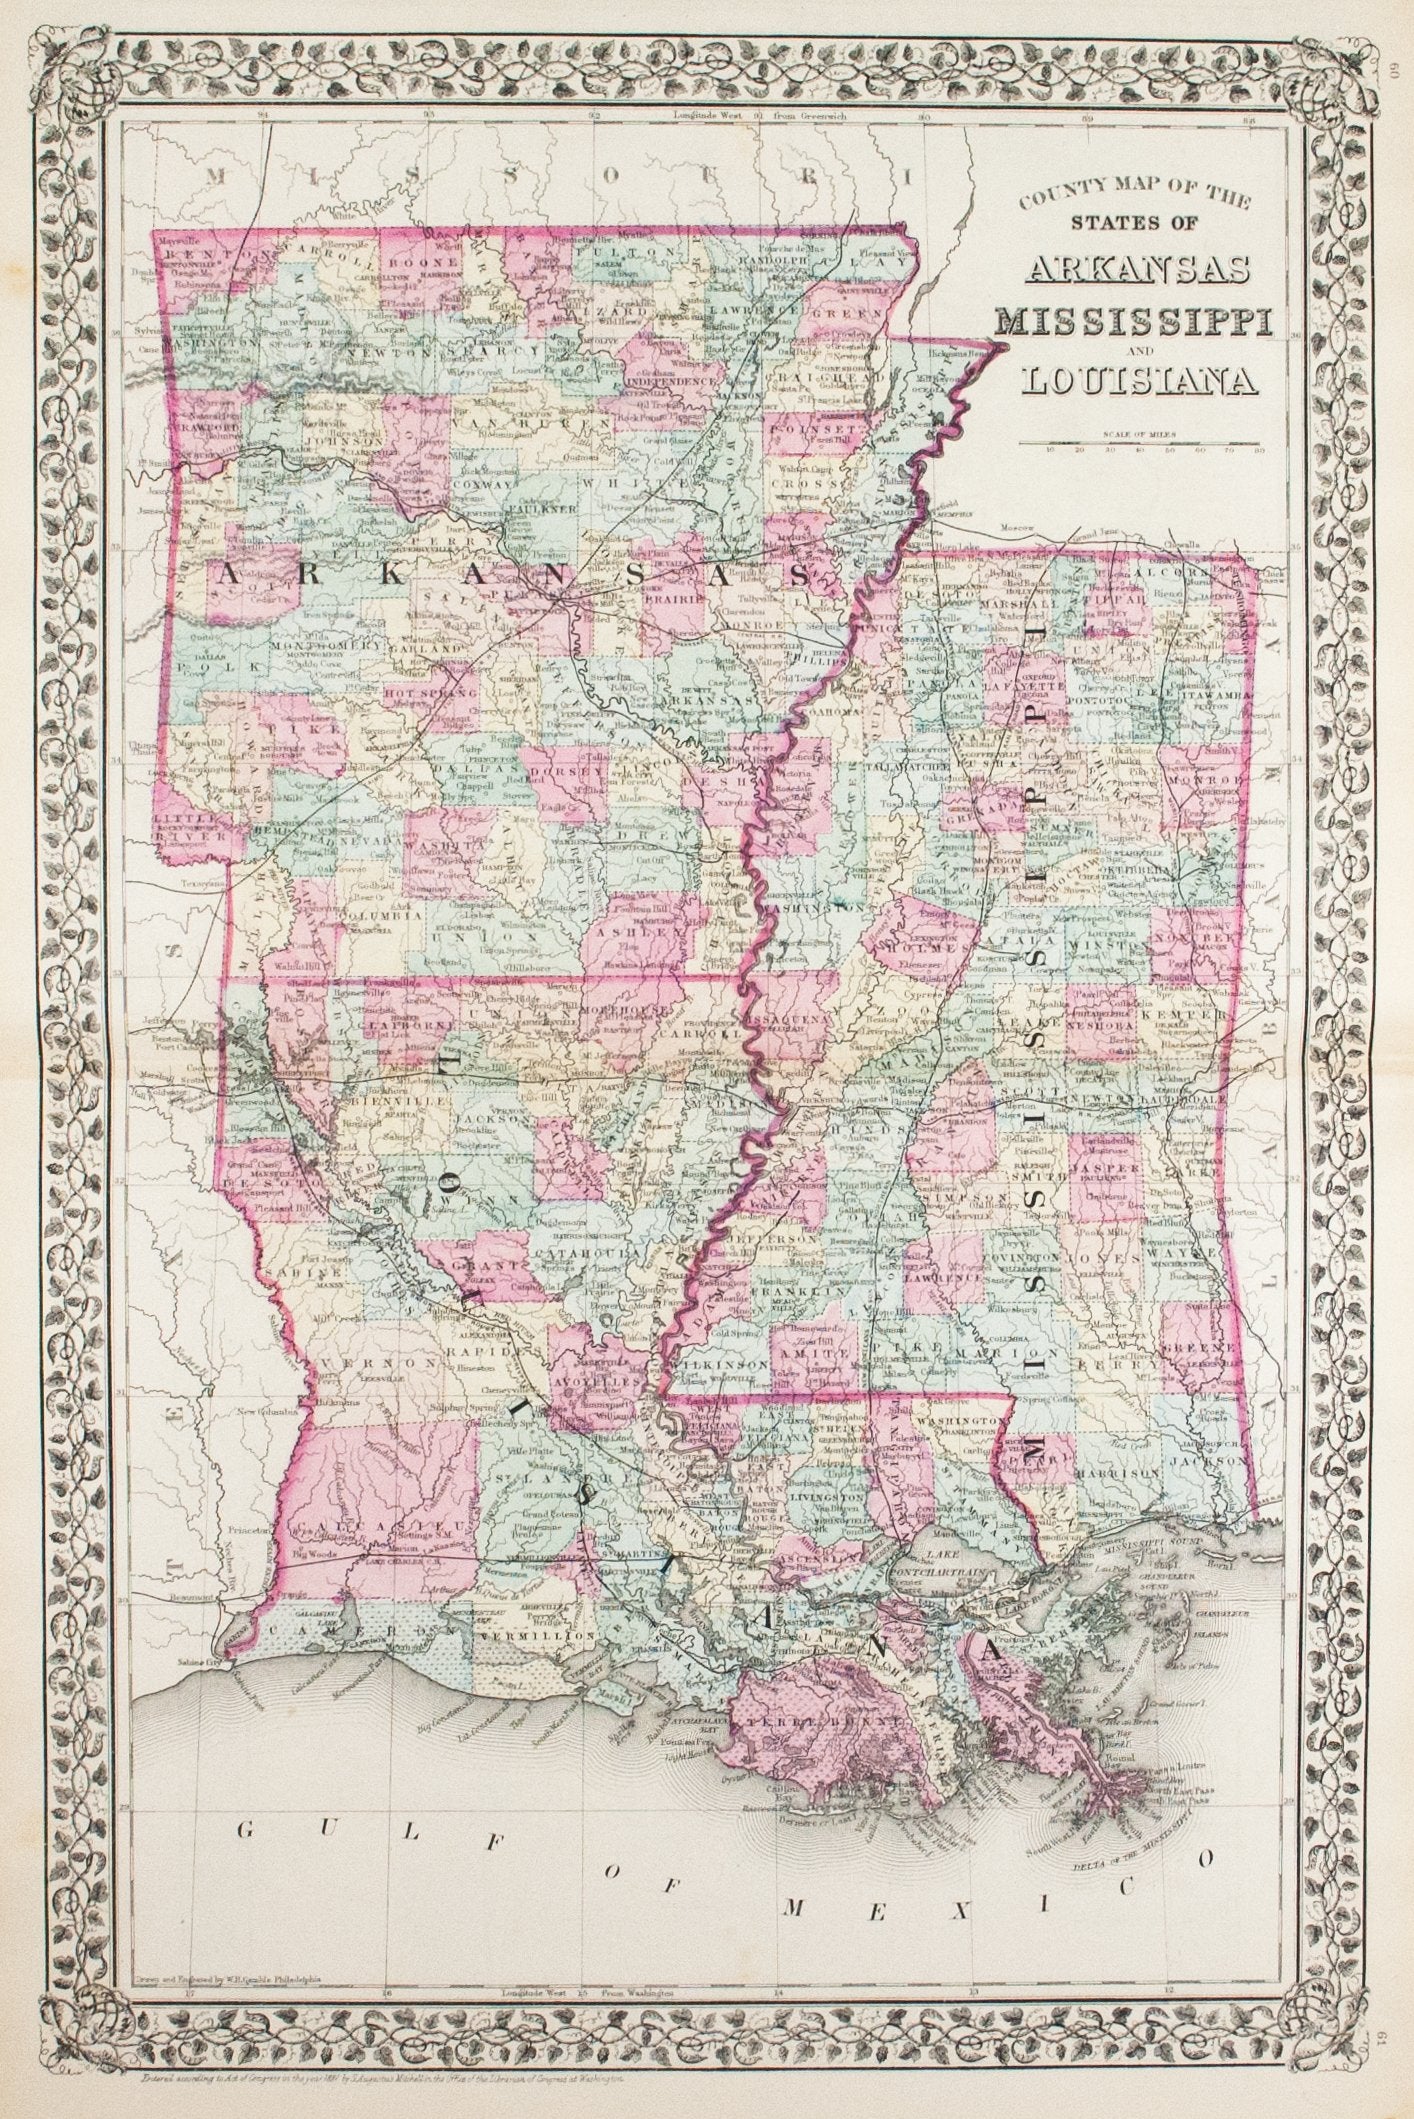 1881 County Map of the States of Arkansas, Mississippi and